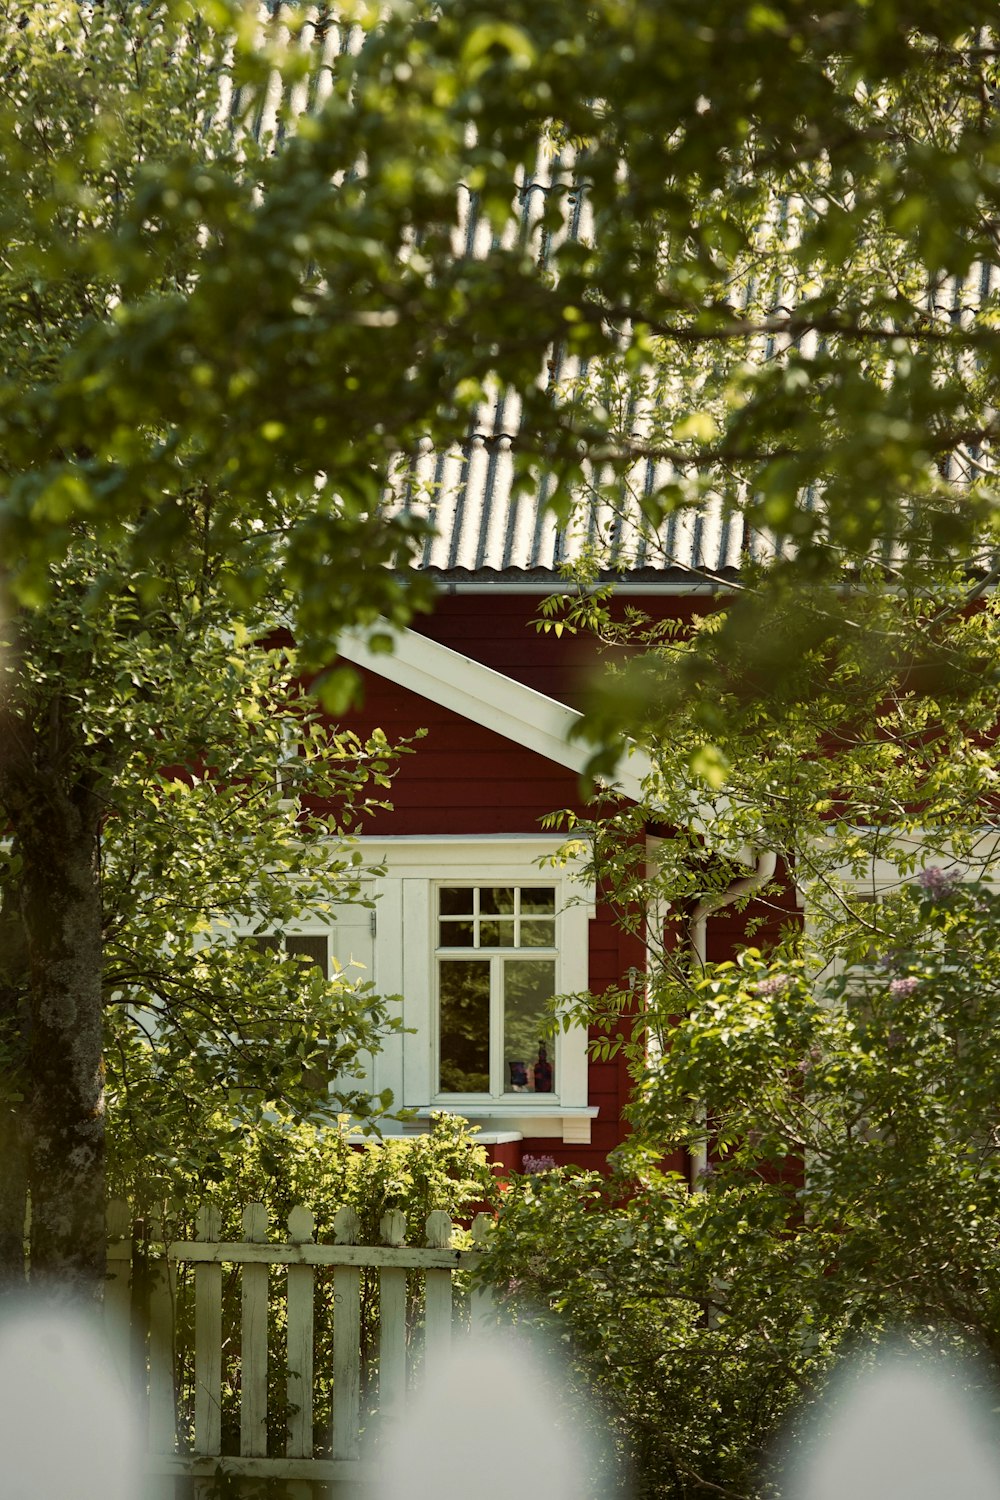 a red house with a white window and a white picket fence